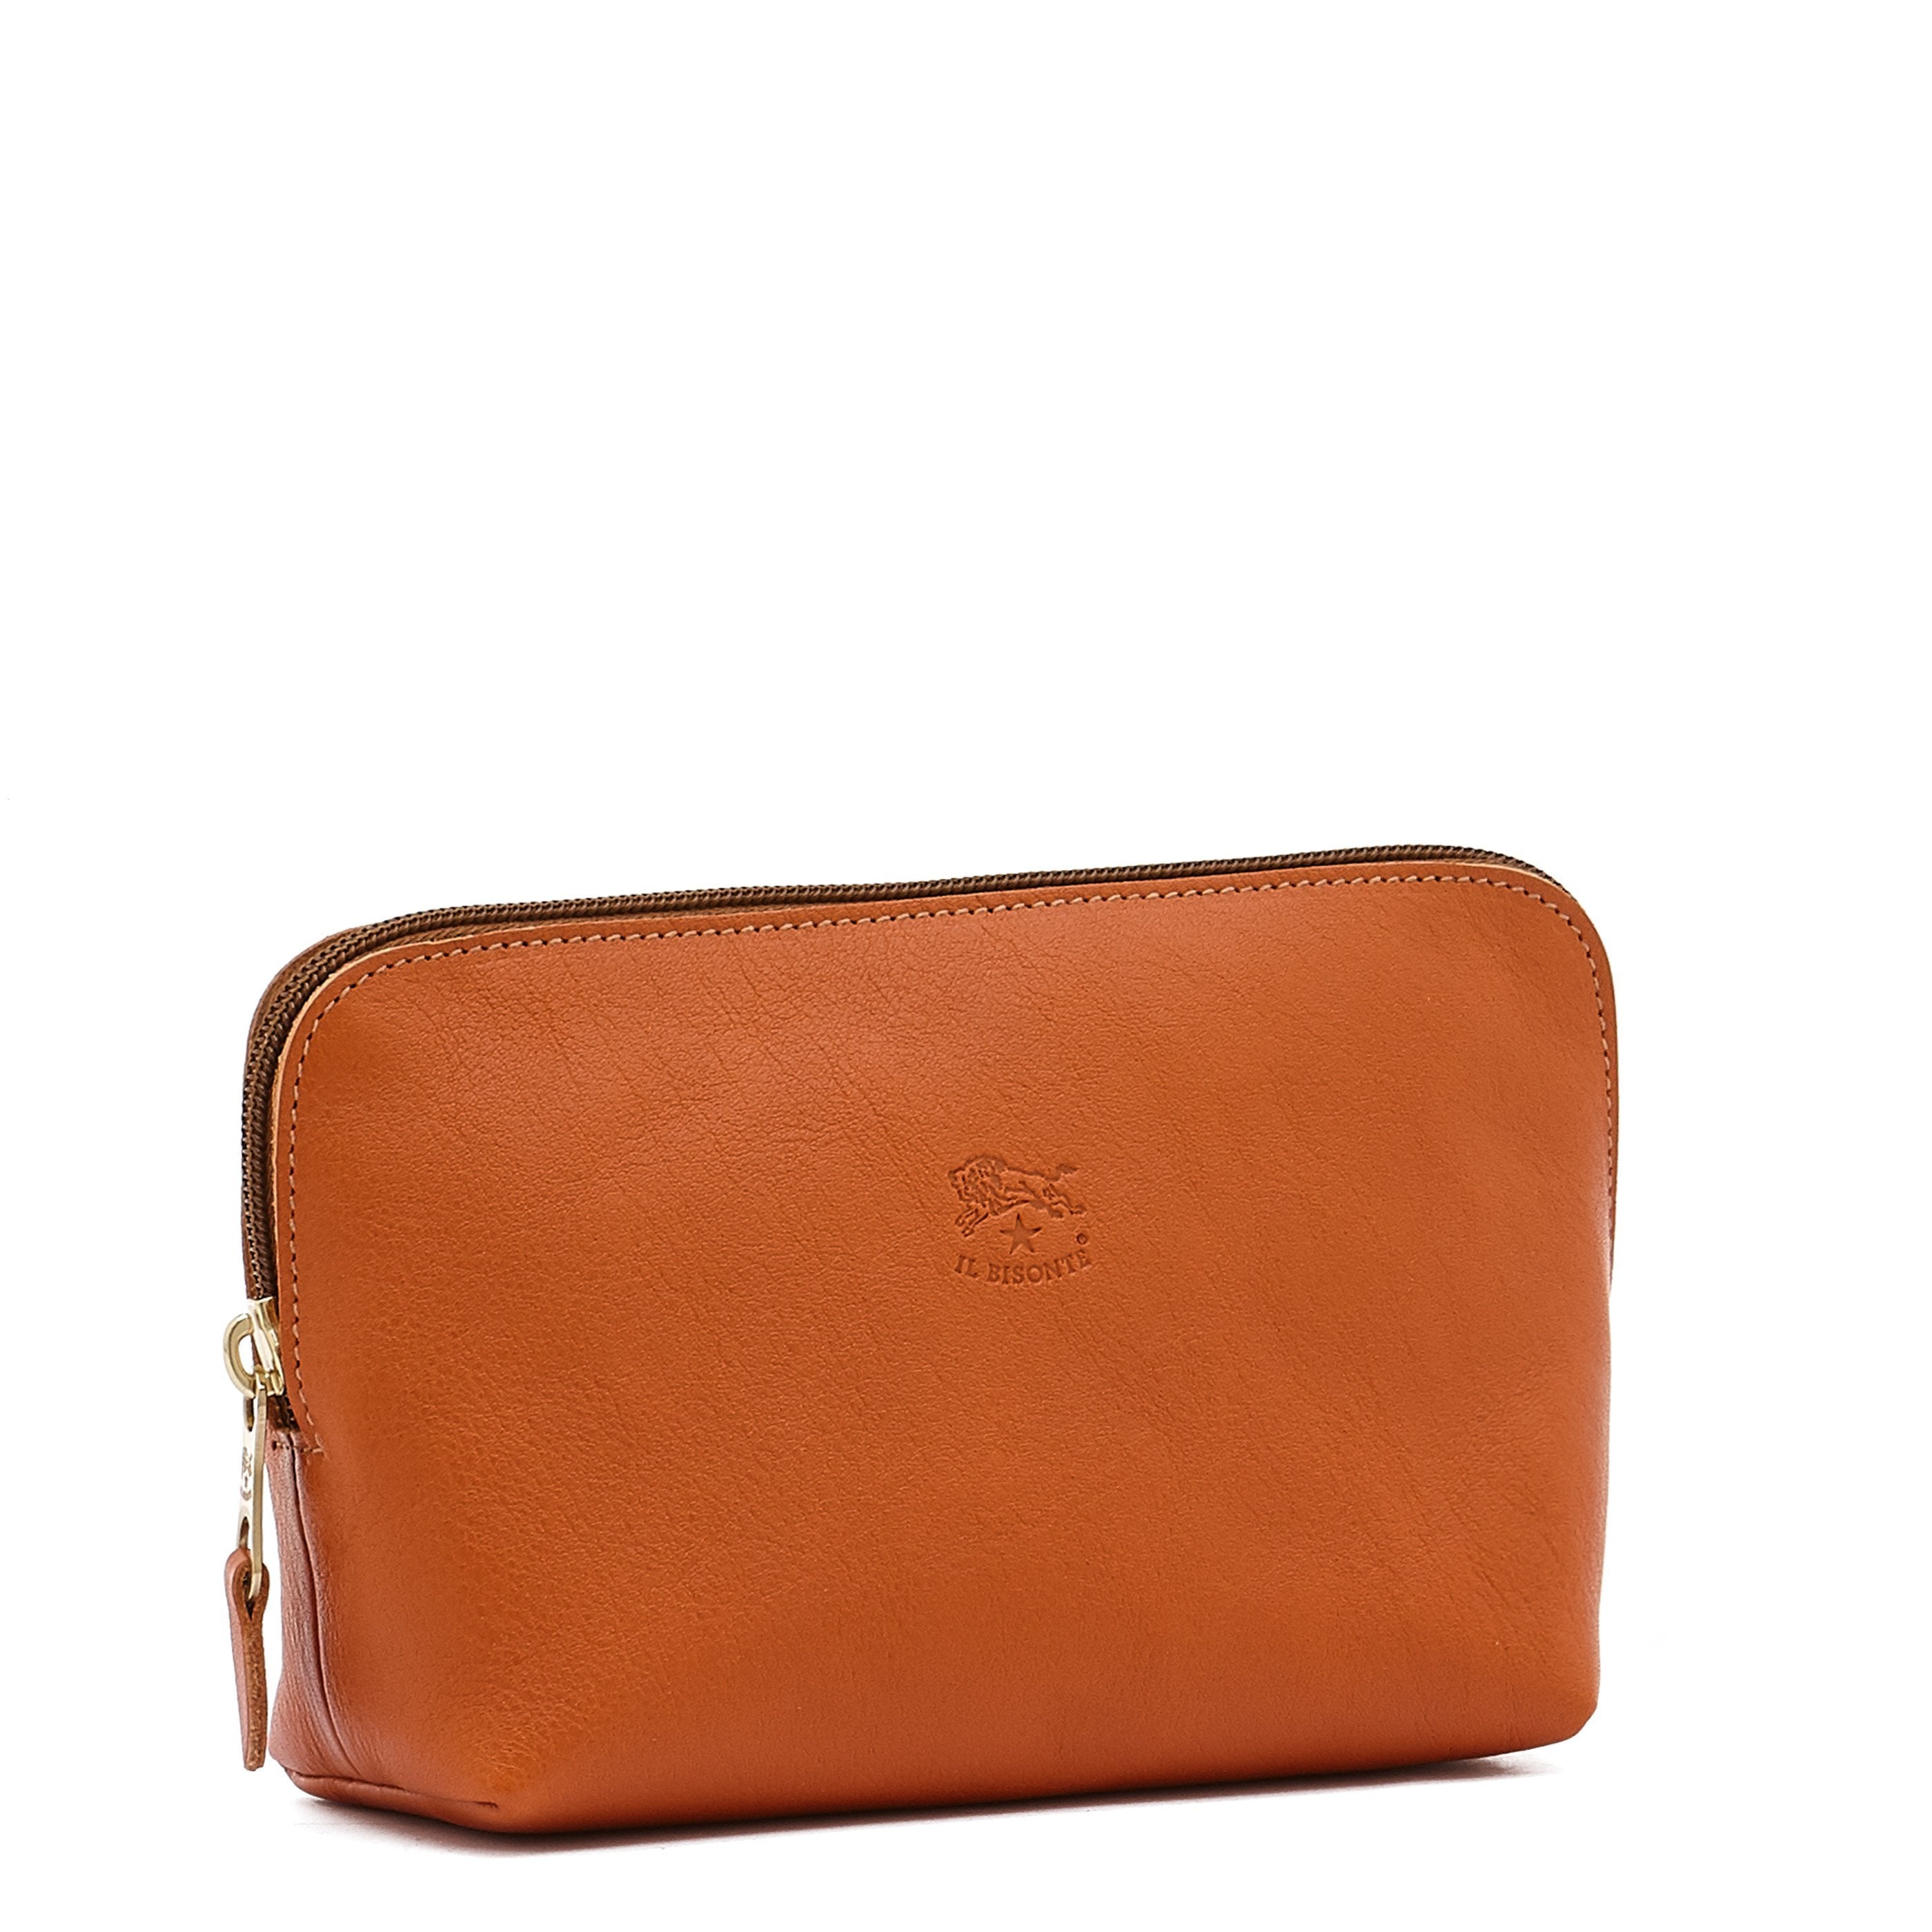 Women's case in calf leather color caramel – Il Bisonte